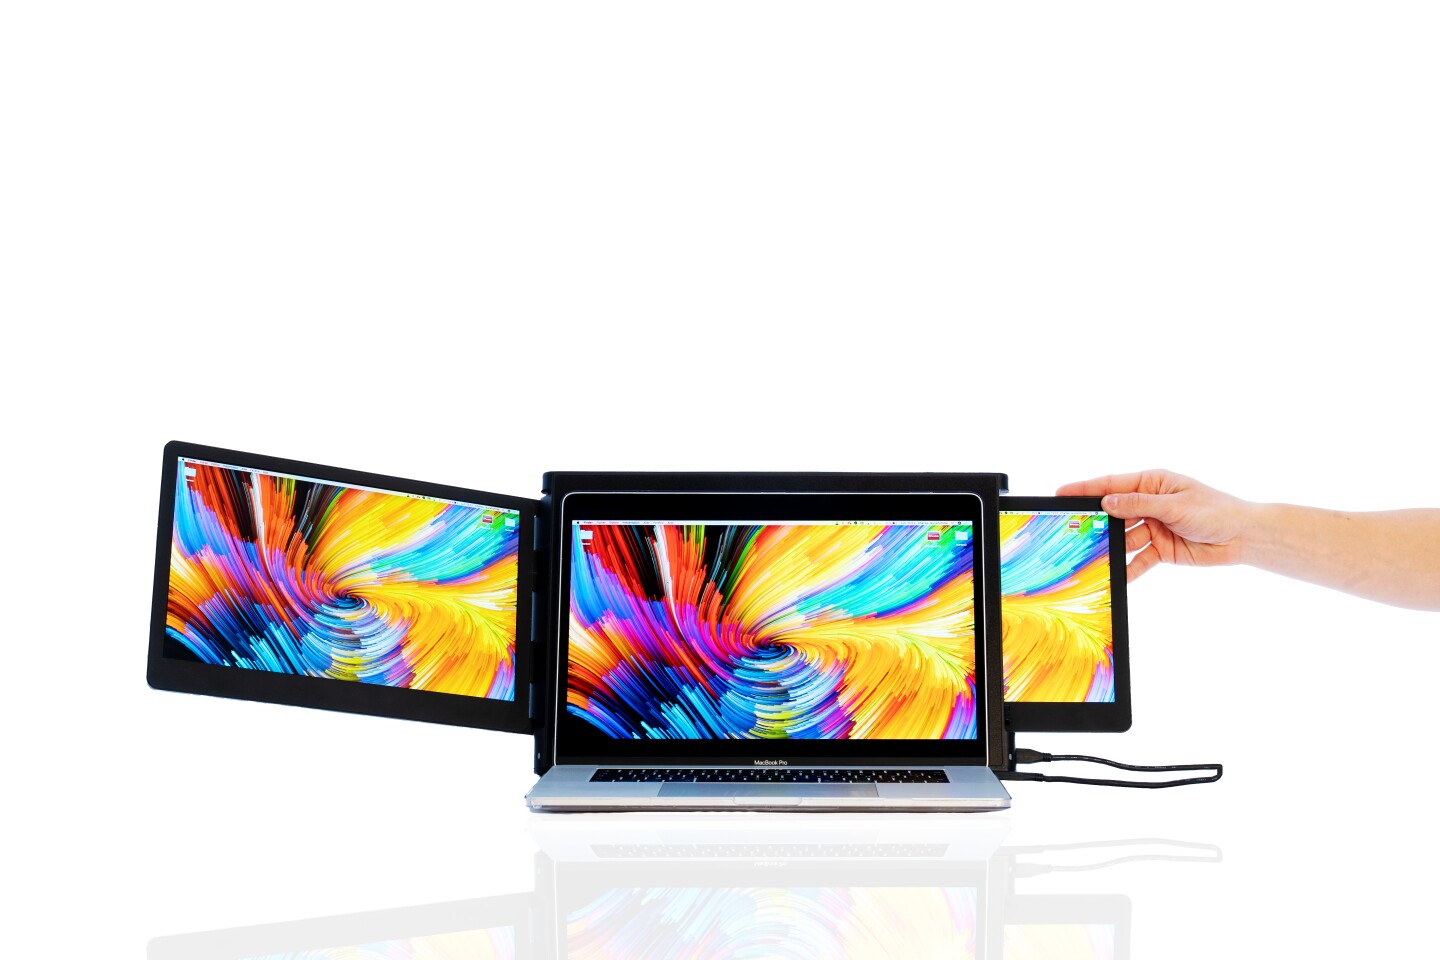 The Slide essentially adds two extra displays to a laptop cabled up over USB